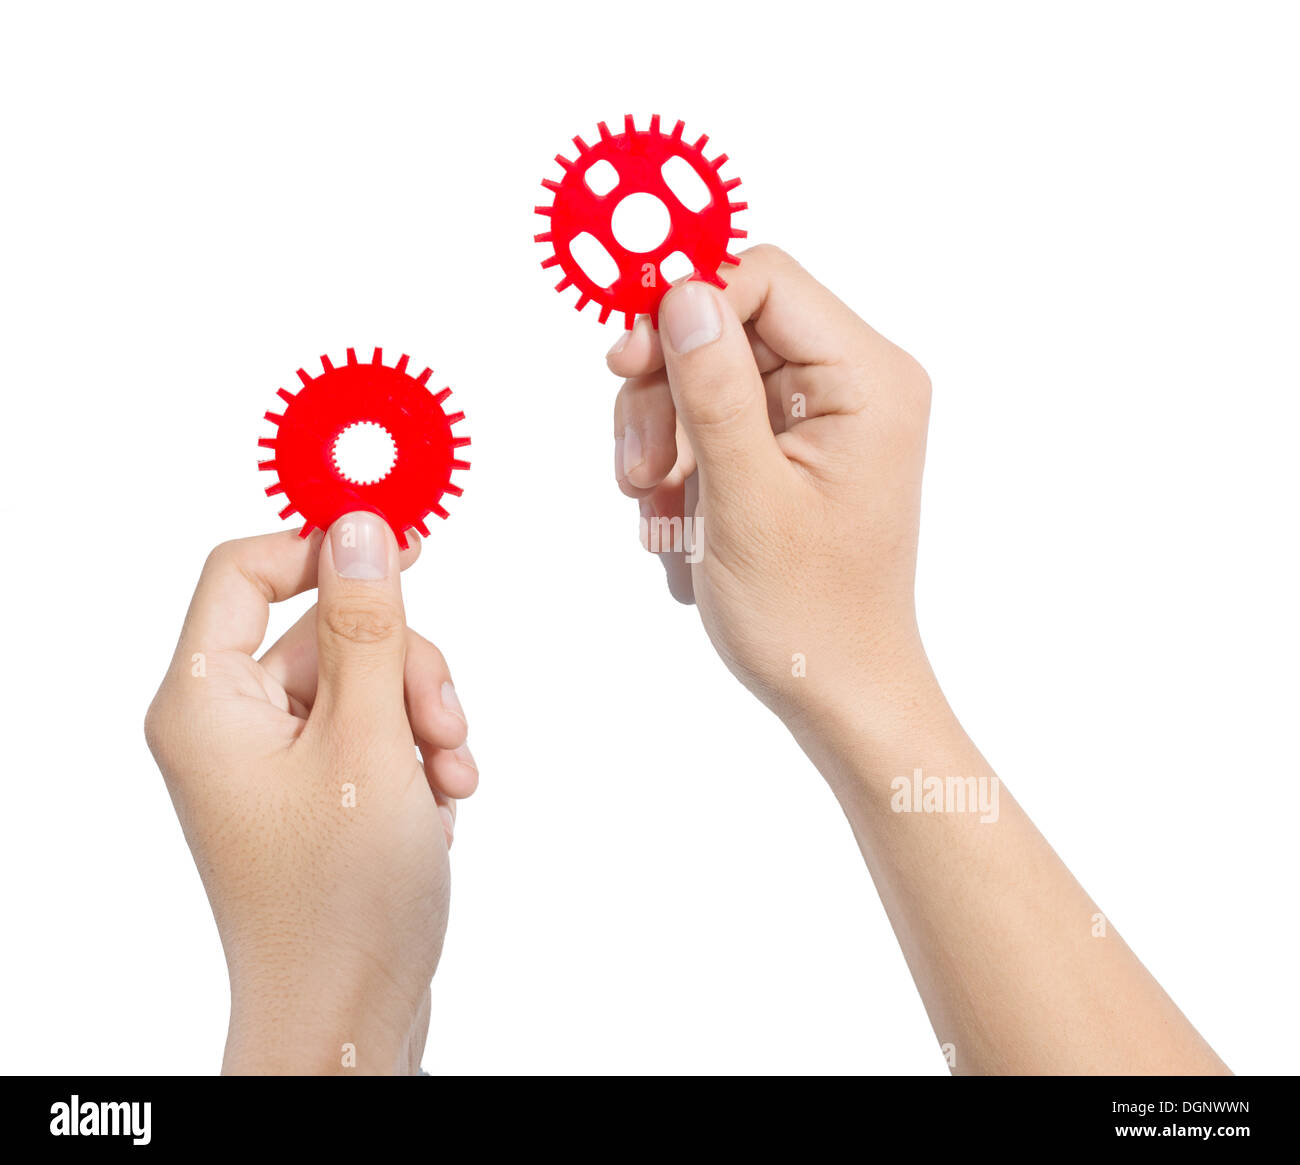 Man designing a mechanic system with red cog gear wheels. Stock Photo